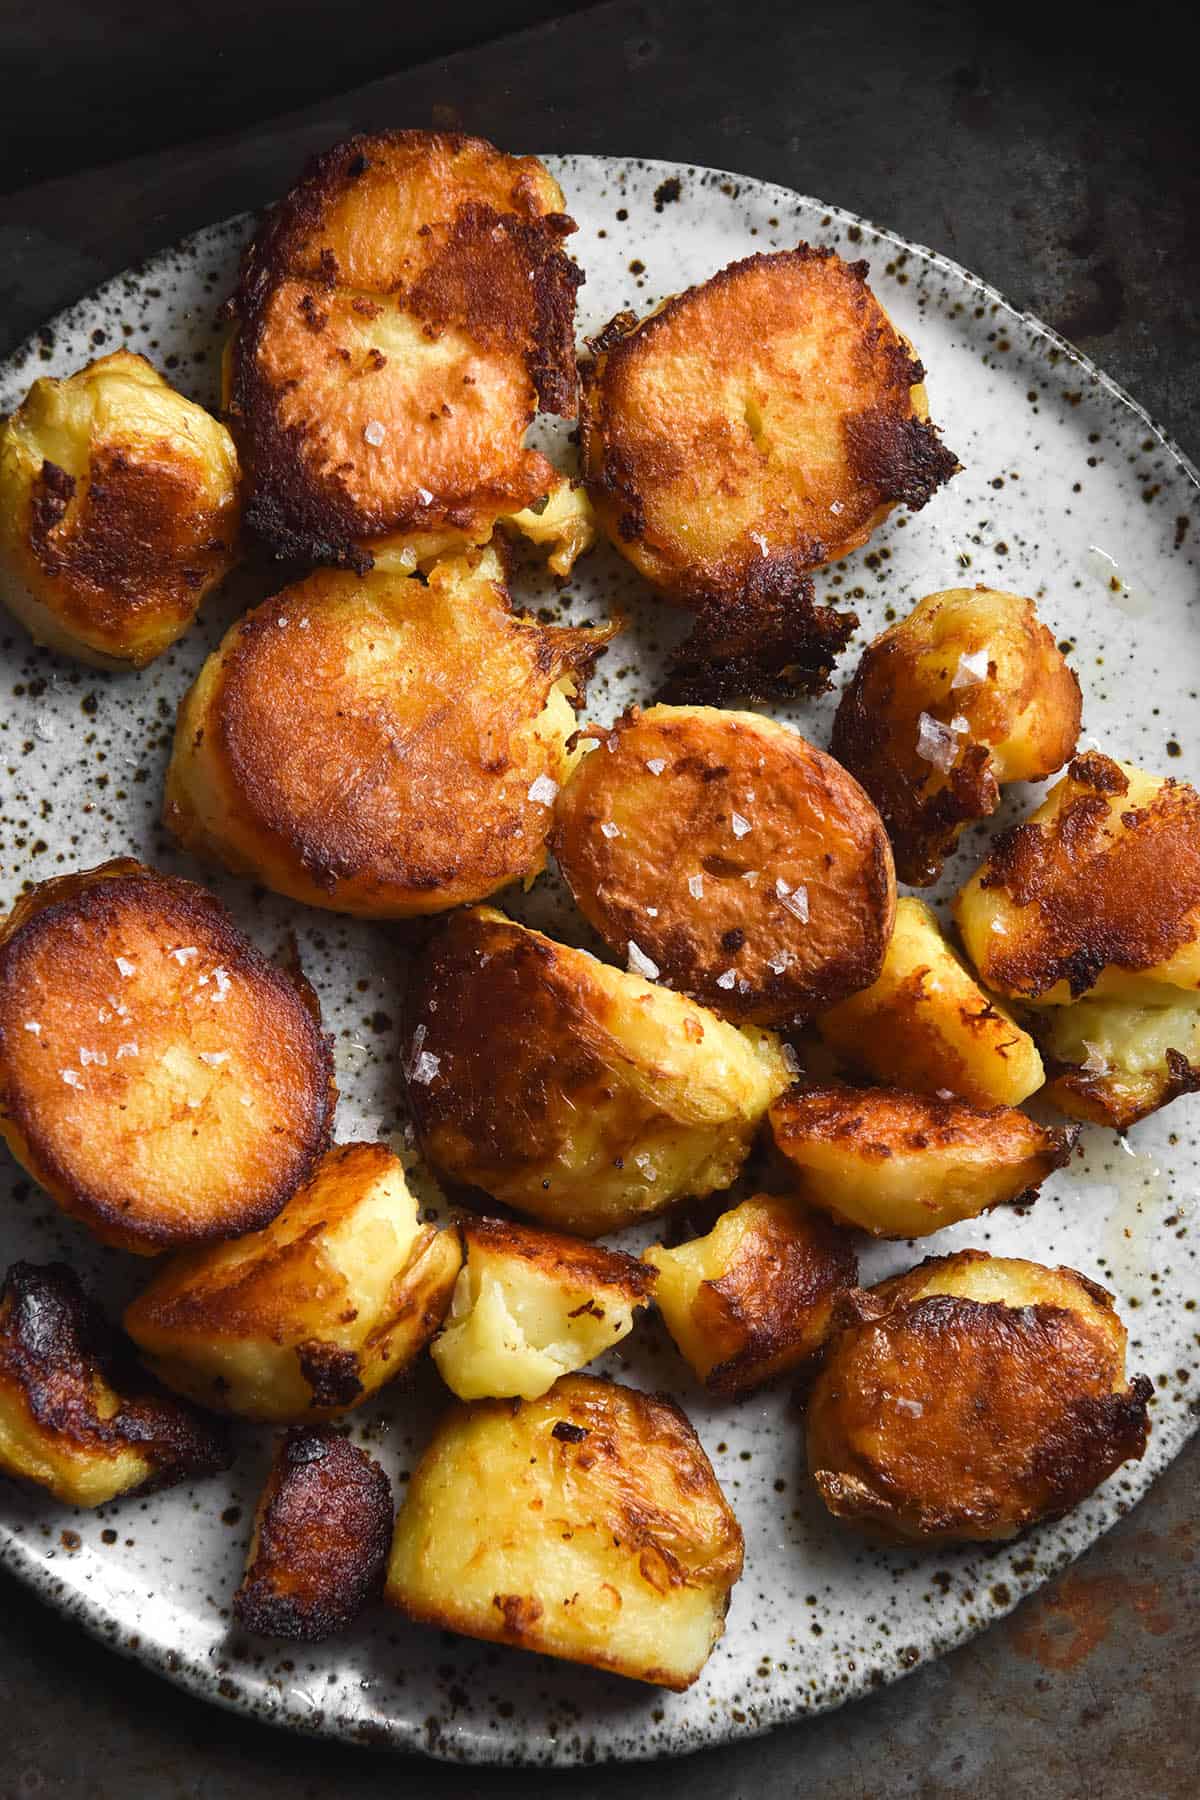 An aerial image of a plate of crispy, golden brown roast potatoes on a white speckled ceramic plate. The potatoes are sprinkled with sea salt flakes and the plate sits atop a dark grey steel backdrop.